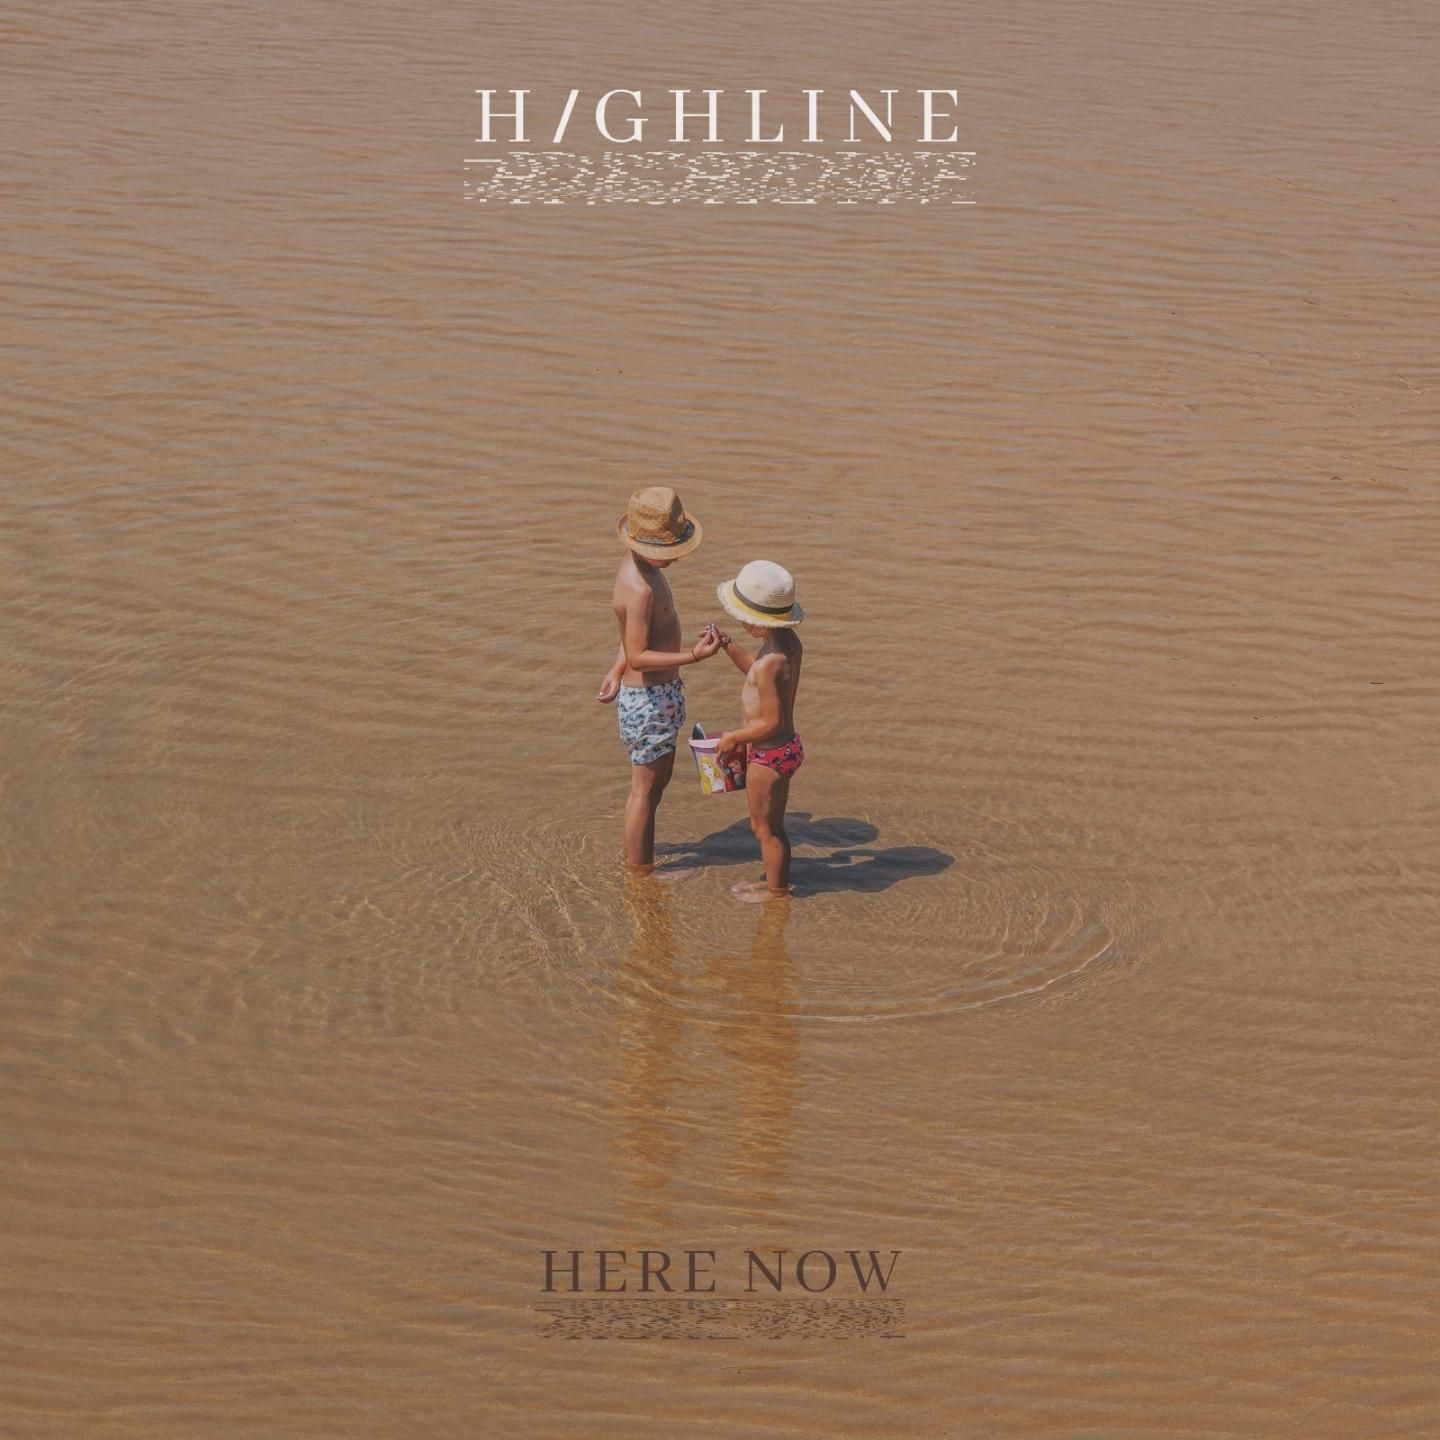 here now - highline - australia - indie - indie music - indie pop - indie rock - indie folk - new music - music blog - wolf in a suit - wolfinasuit - wolf in a suit blog - wolf in a suit music blog